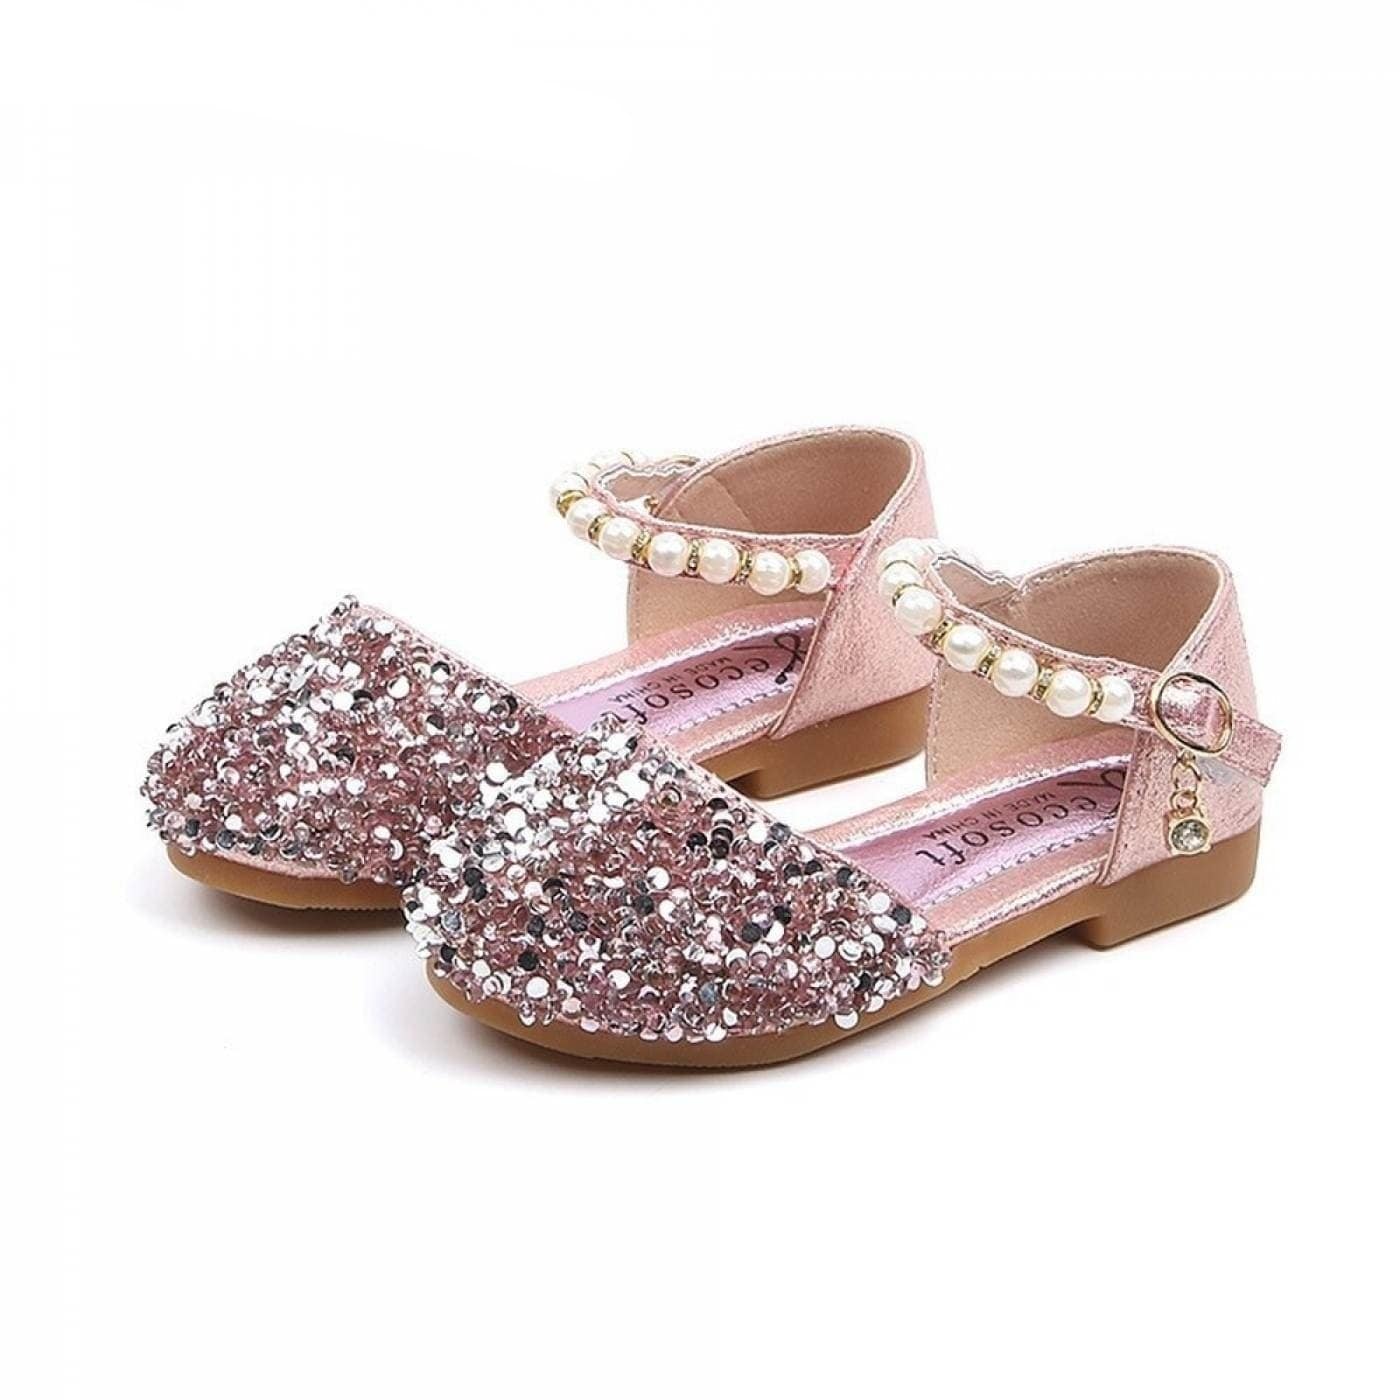 Chaussure Princesse Fille 6 Ans rose